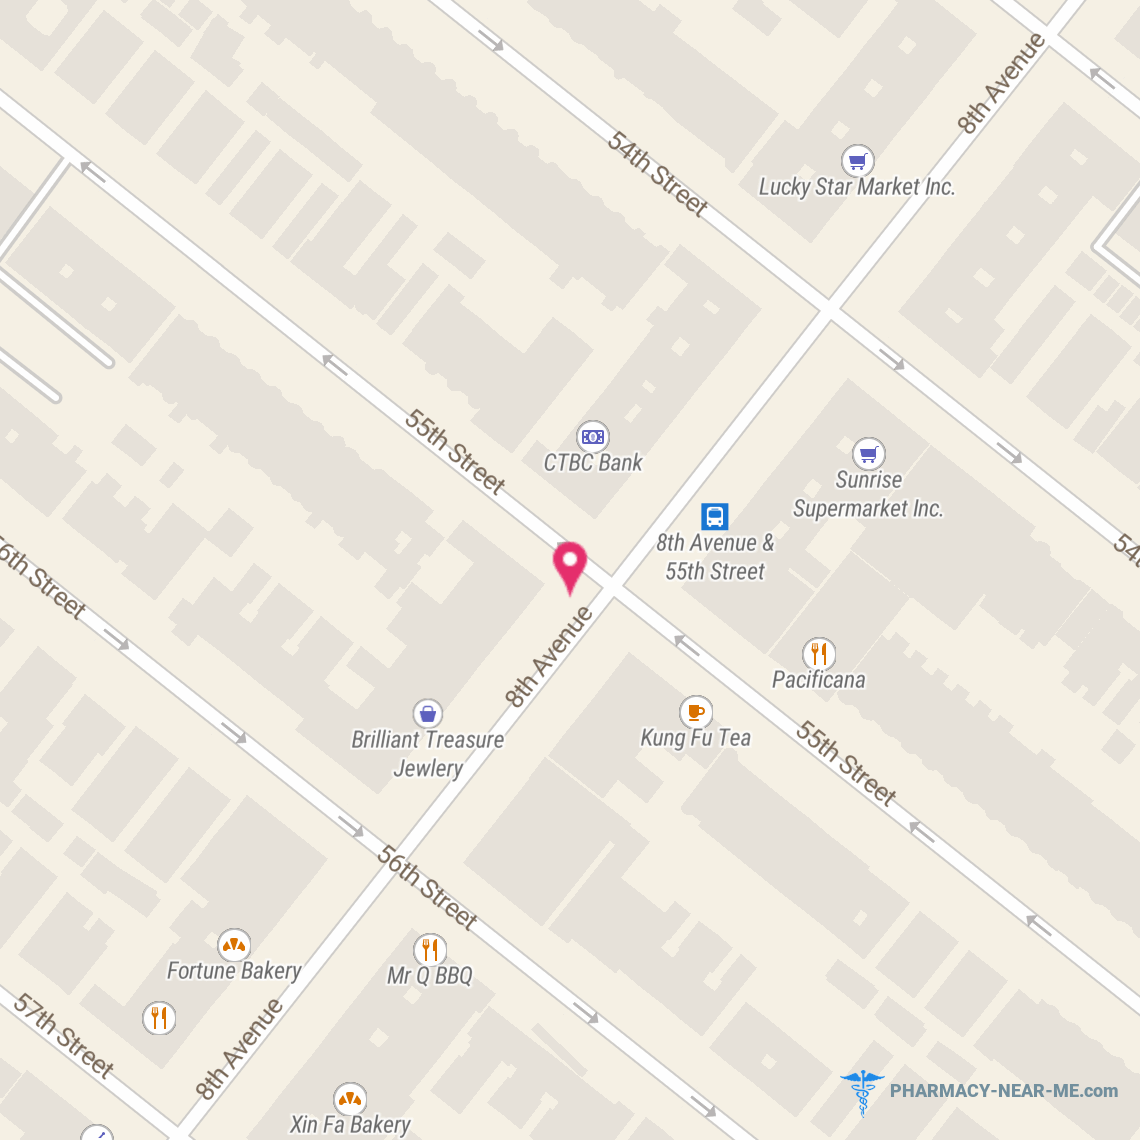 DKY ENTERPRISE - Pharmacy Hours, Phone, Reviews & Information: 5504 8th Avenue, Brooklyn, New York 11220, United States